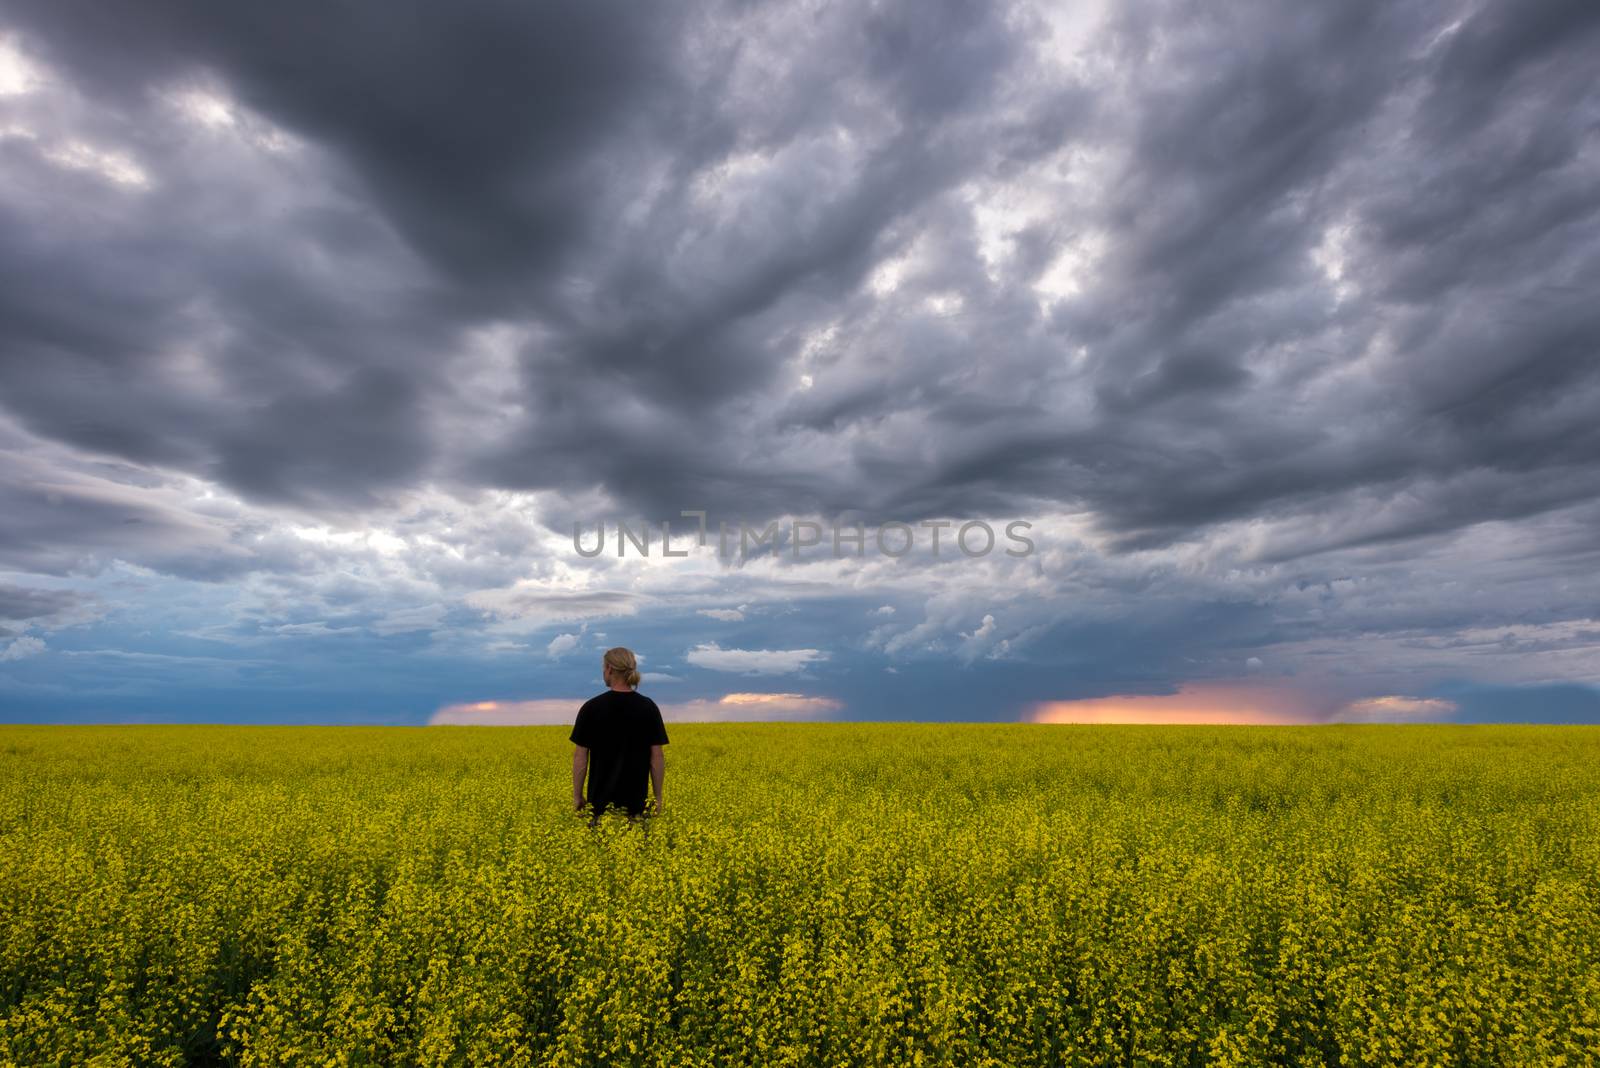 Lone caucasian guy standing in canola field during storm